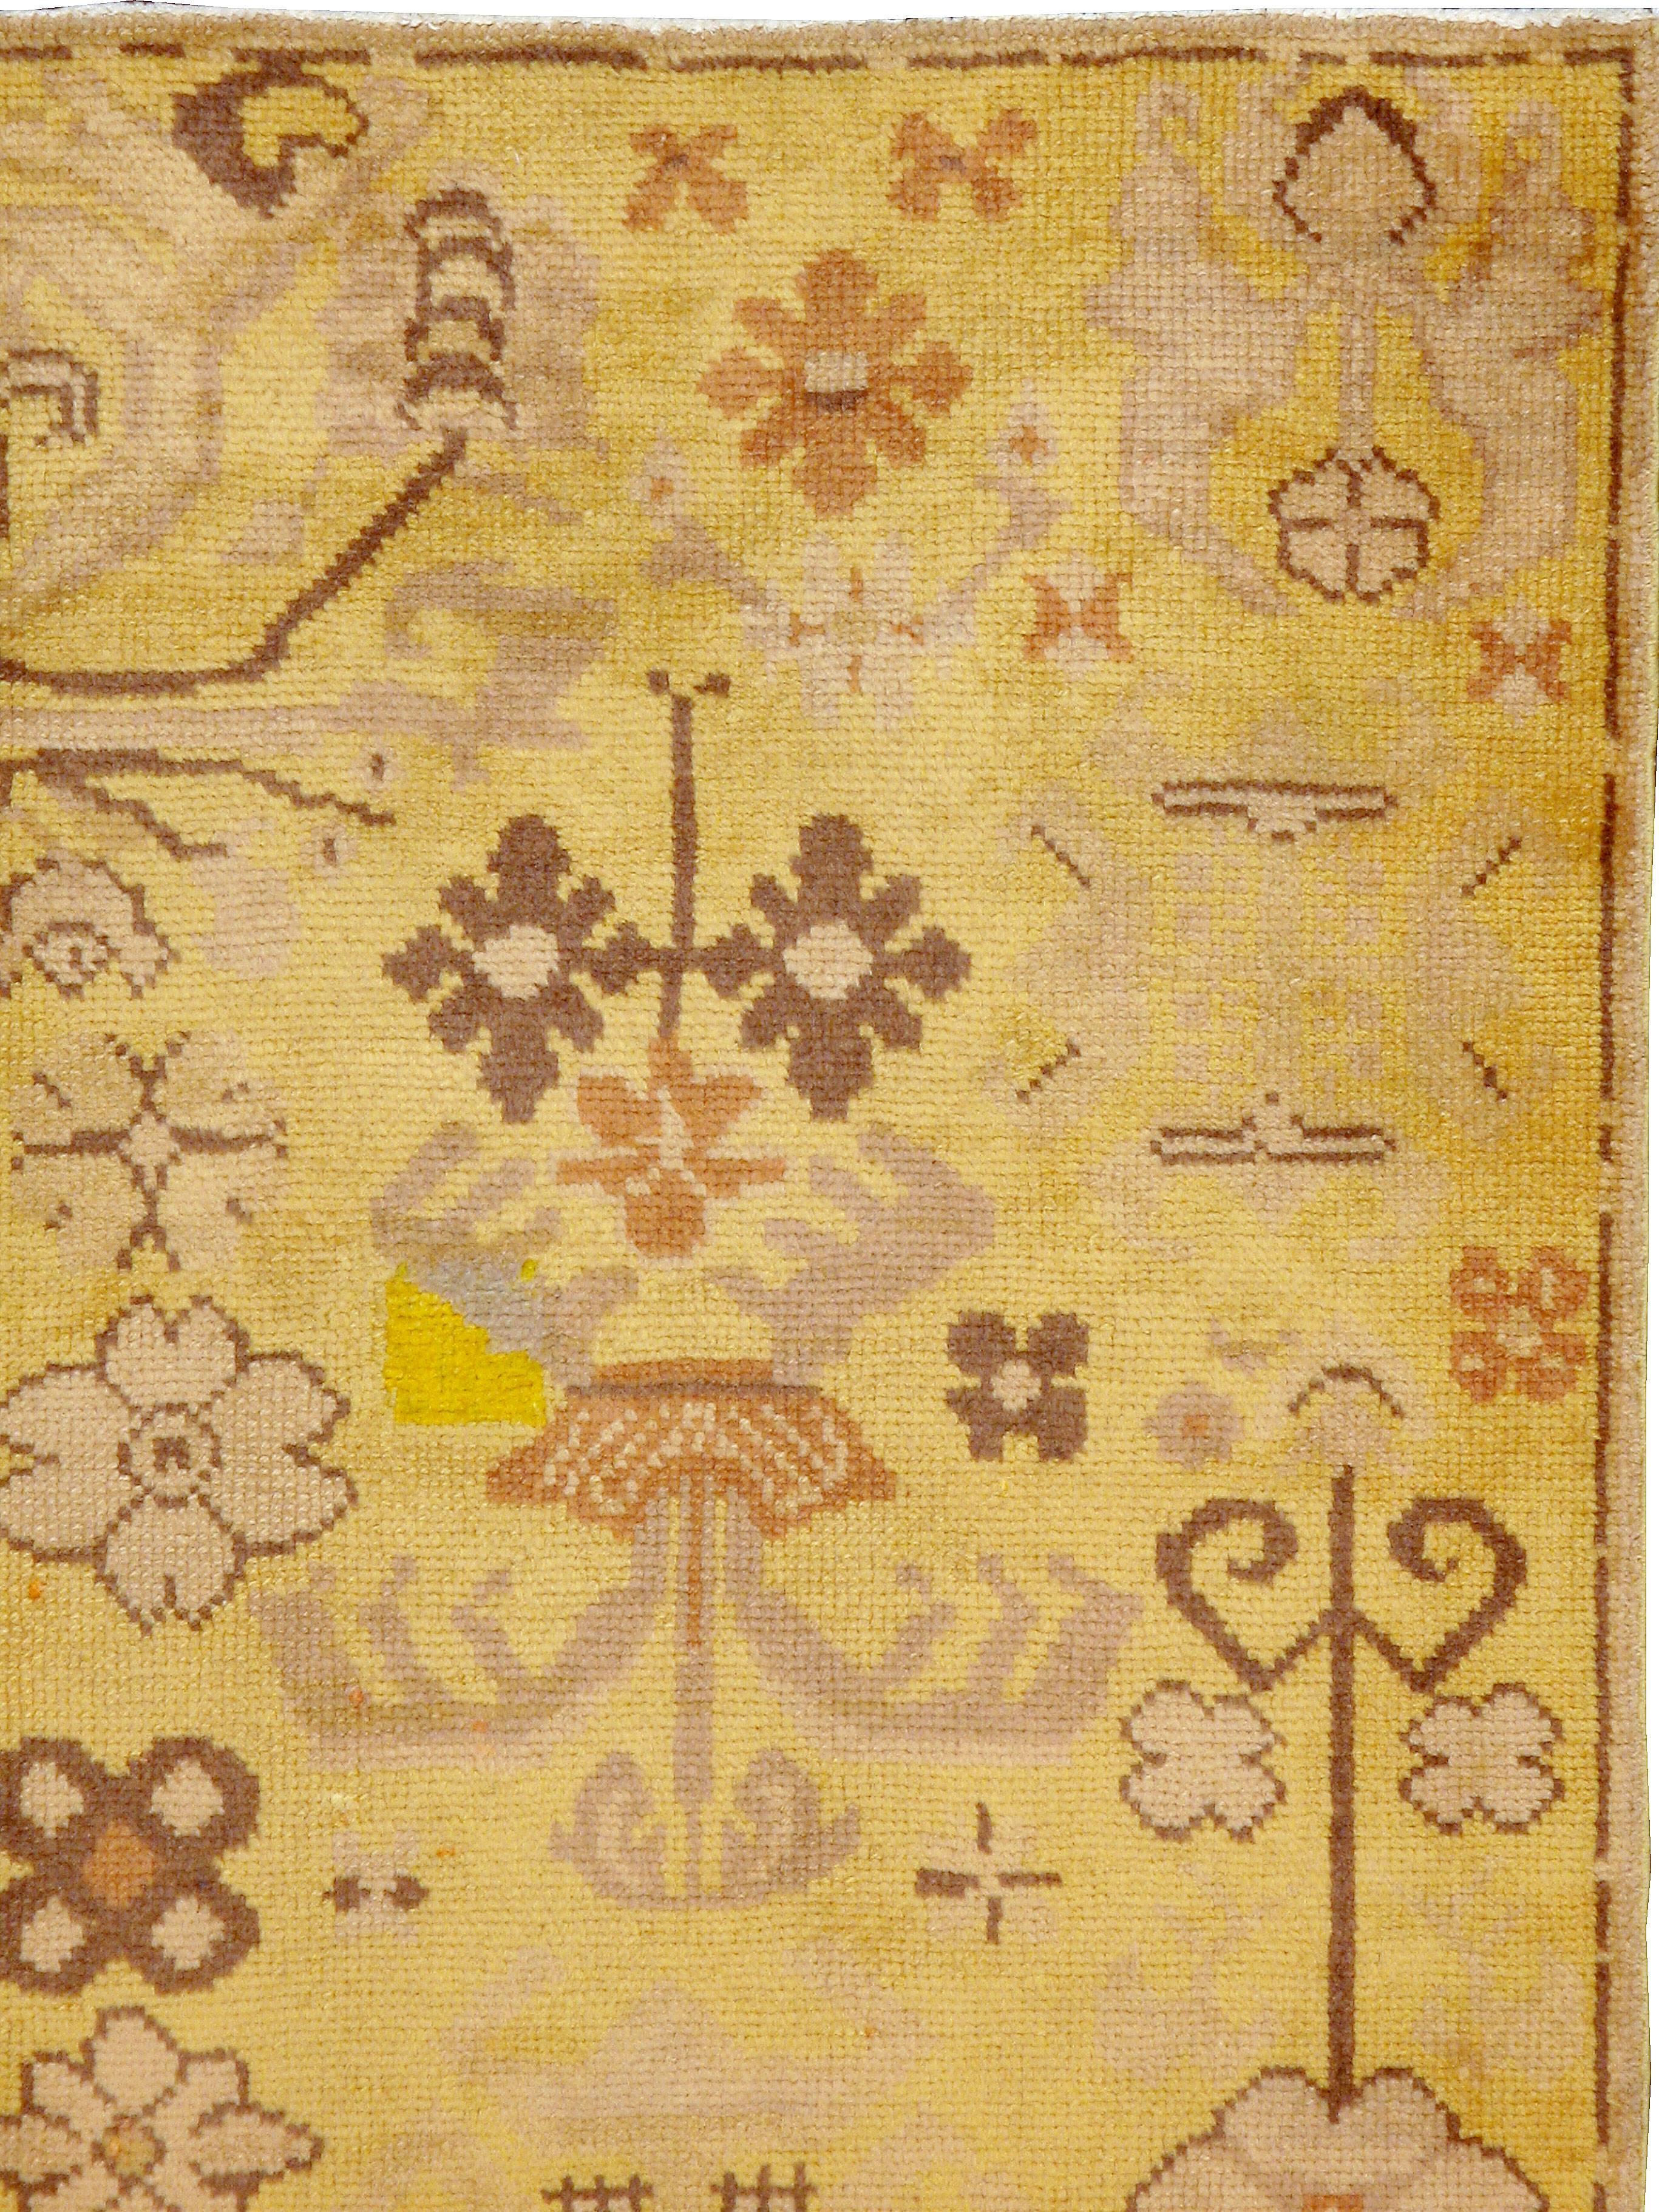 A vintage Spanish Cuenca carpet from the second quarter of the 20th century.